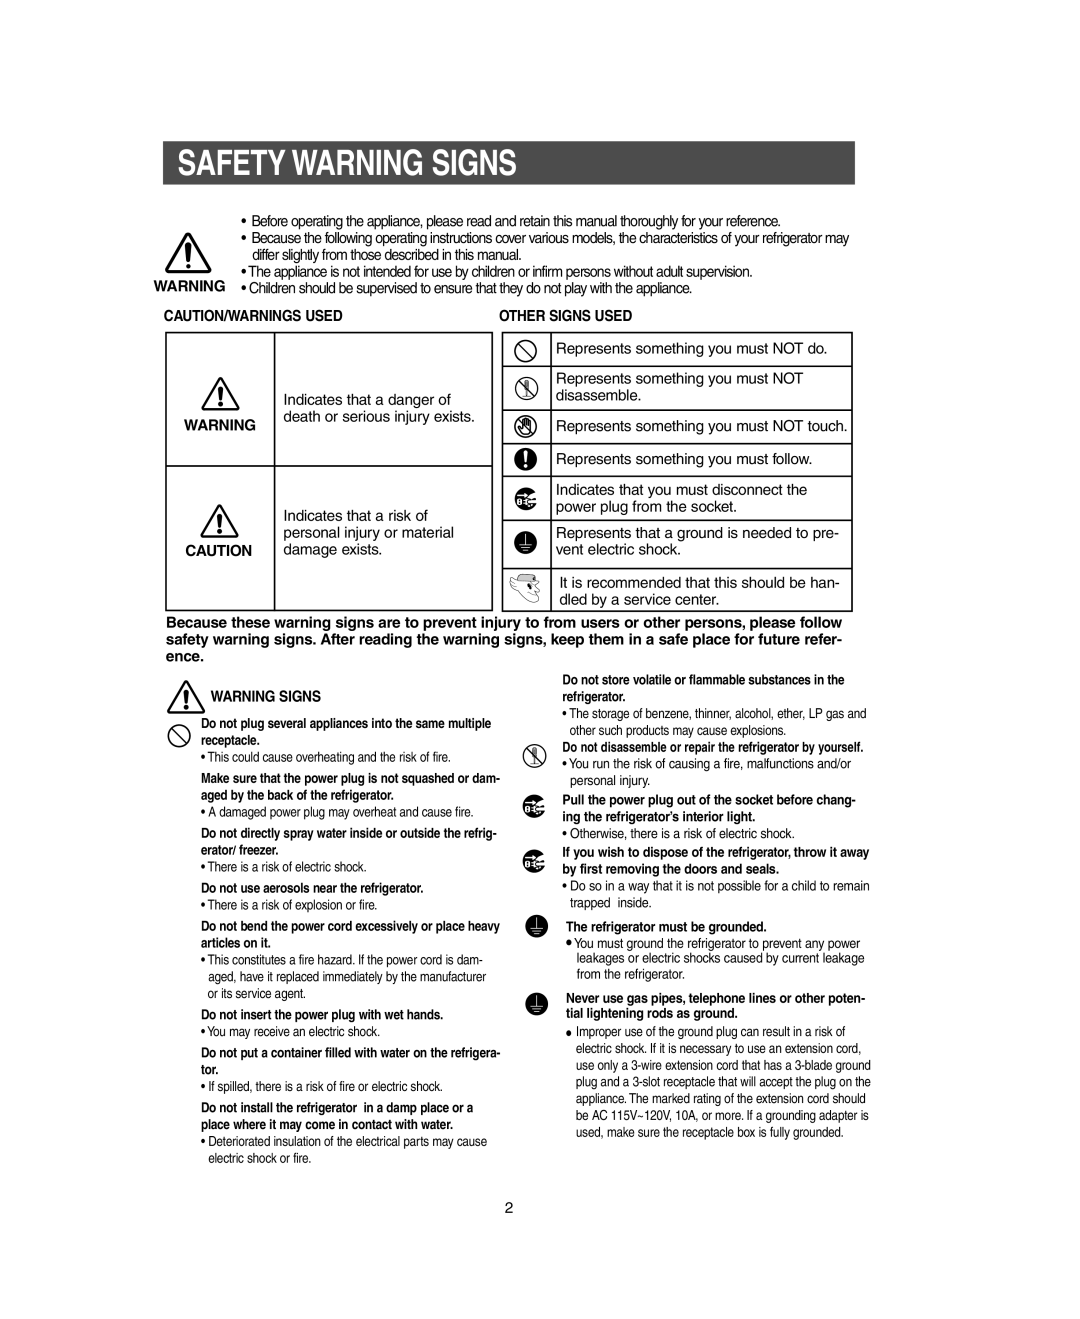 Samsung RM255LARS owner manual Safety Warning Signs, Caution/Warnings Used, Other Signs Used 